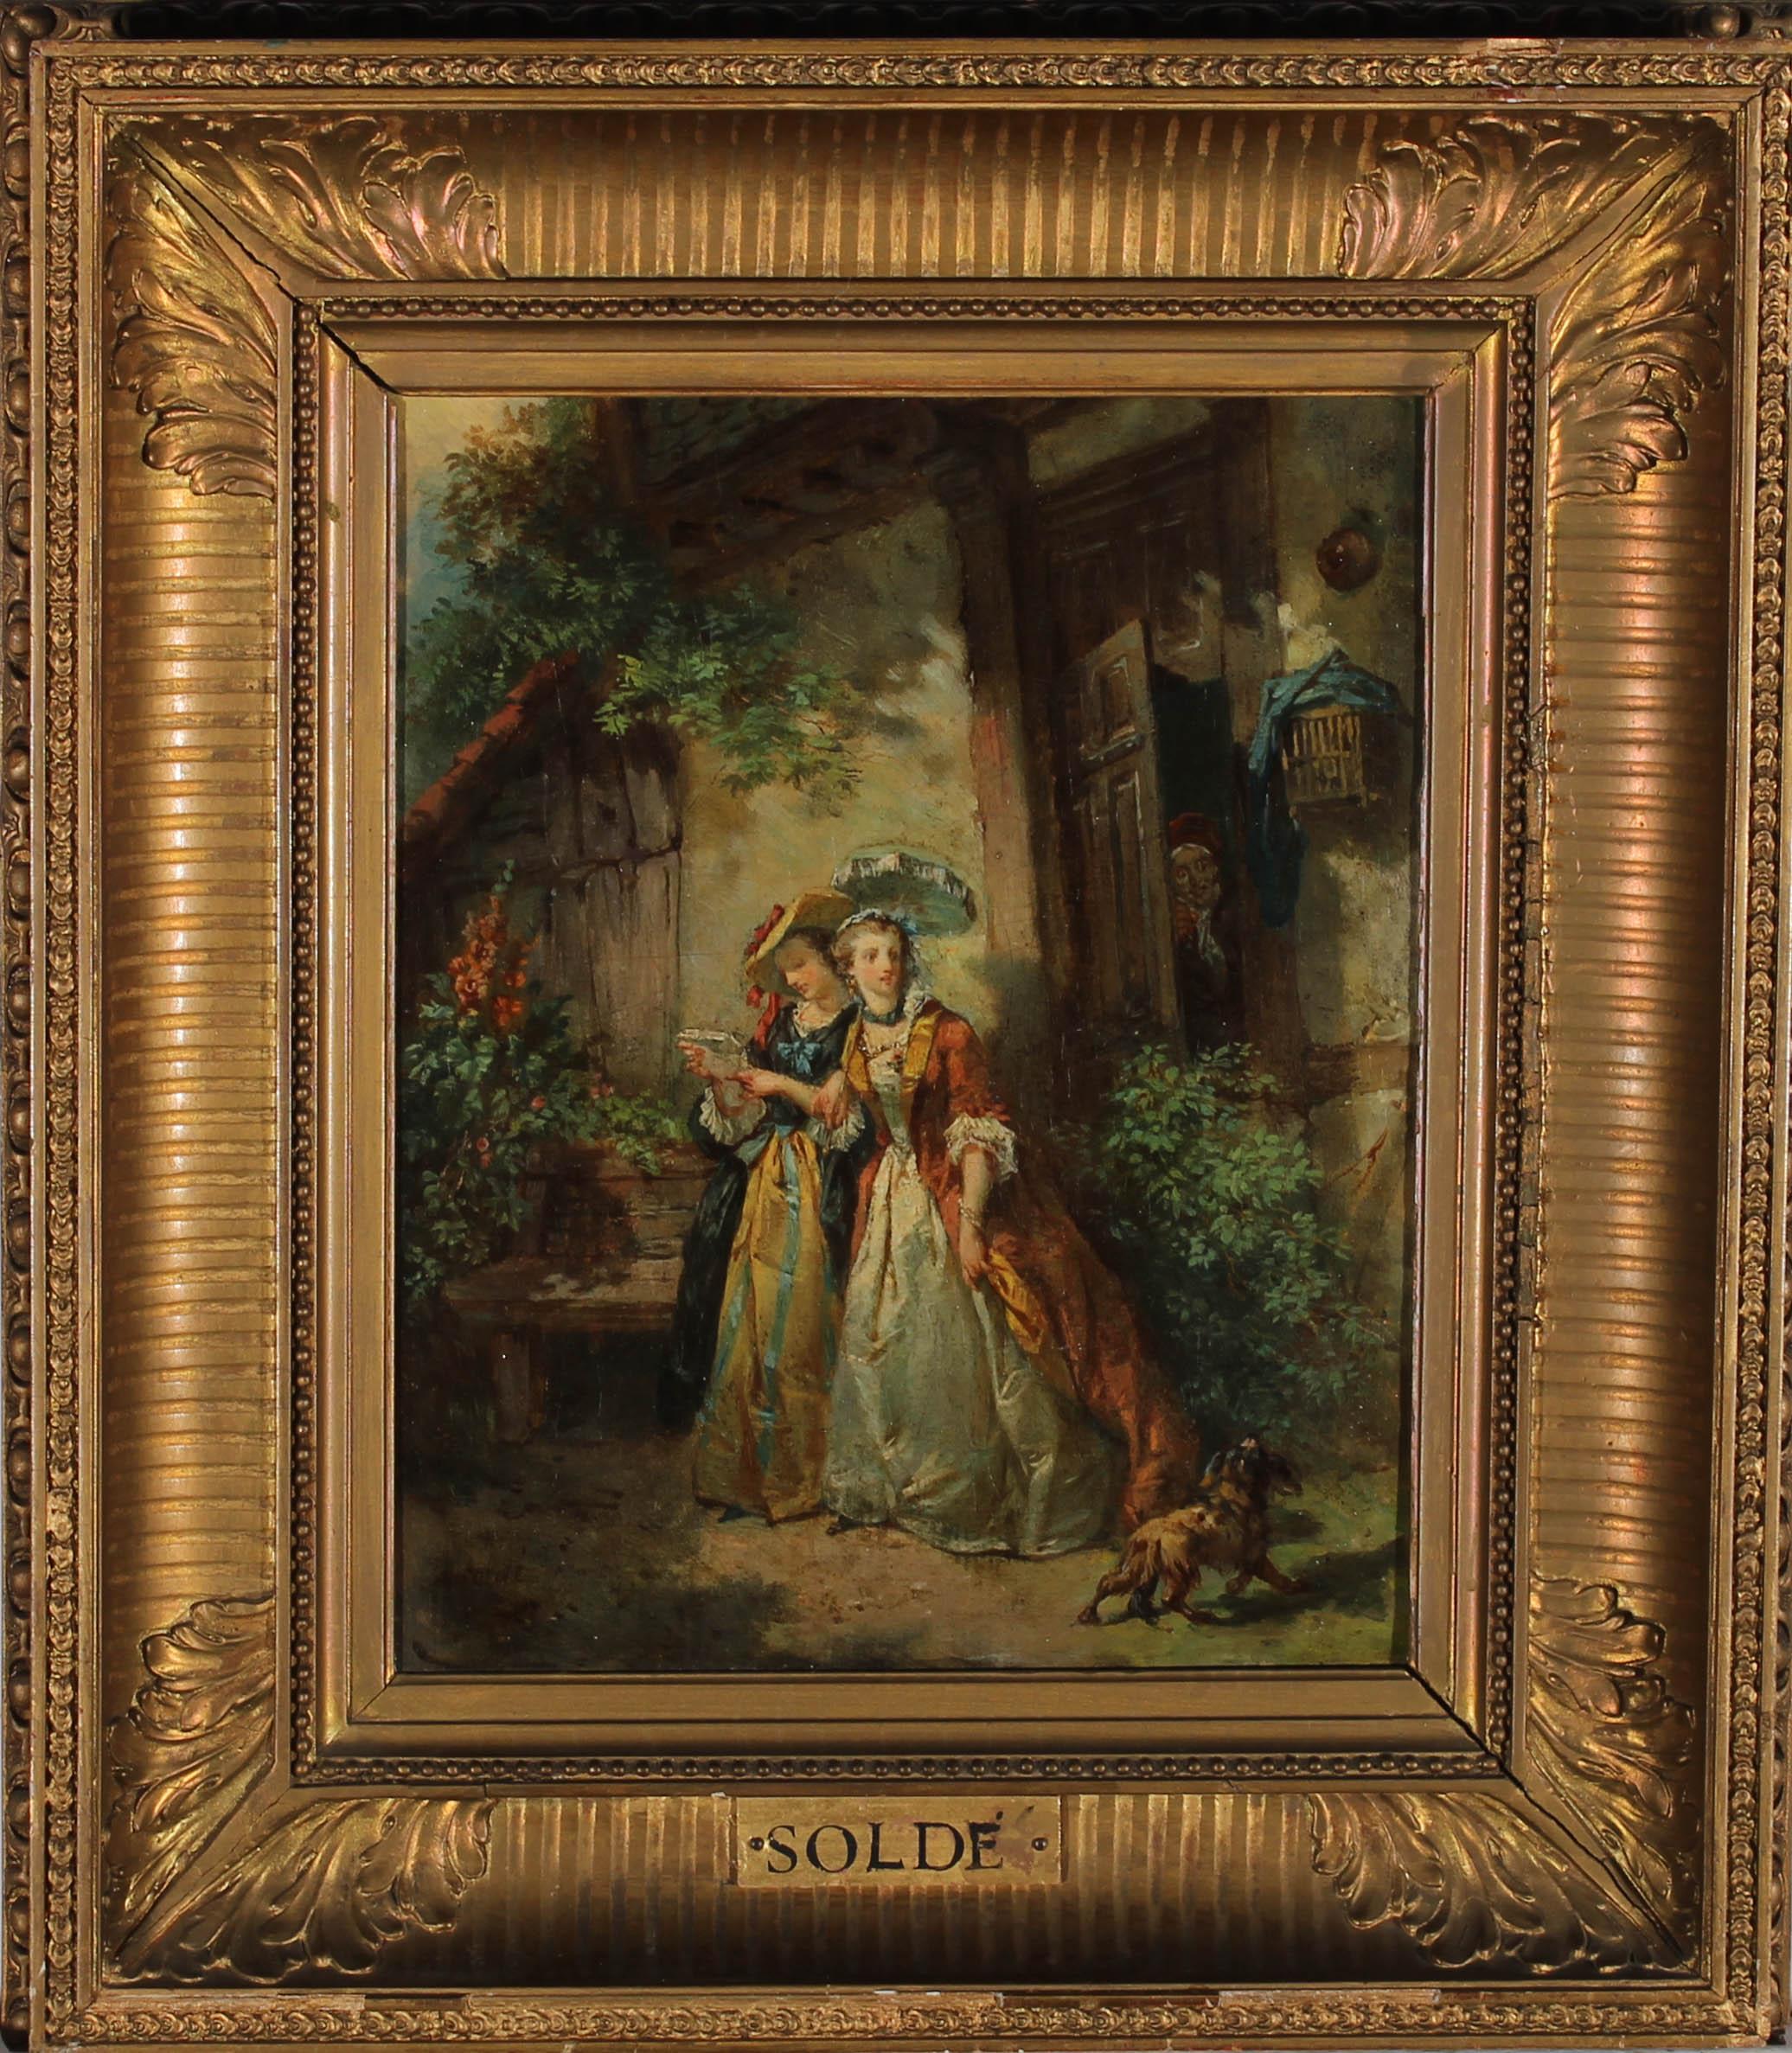 An exquisite example of the work of French genre scene painter, Alexandre Soldé (1822–1893). The scene shows two ladies of society, dressed in elegant attire of the late 18th Century. They are strolling past a ramshackle, cottage with their dog. An